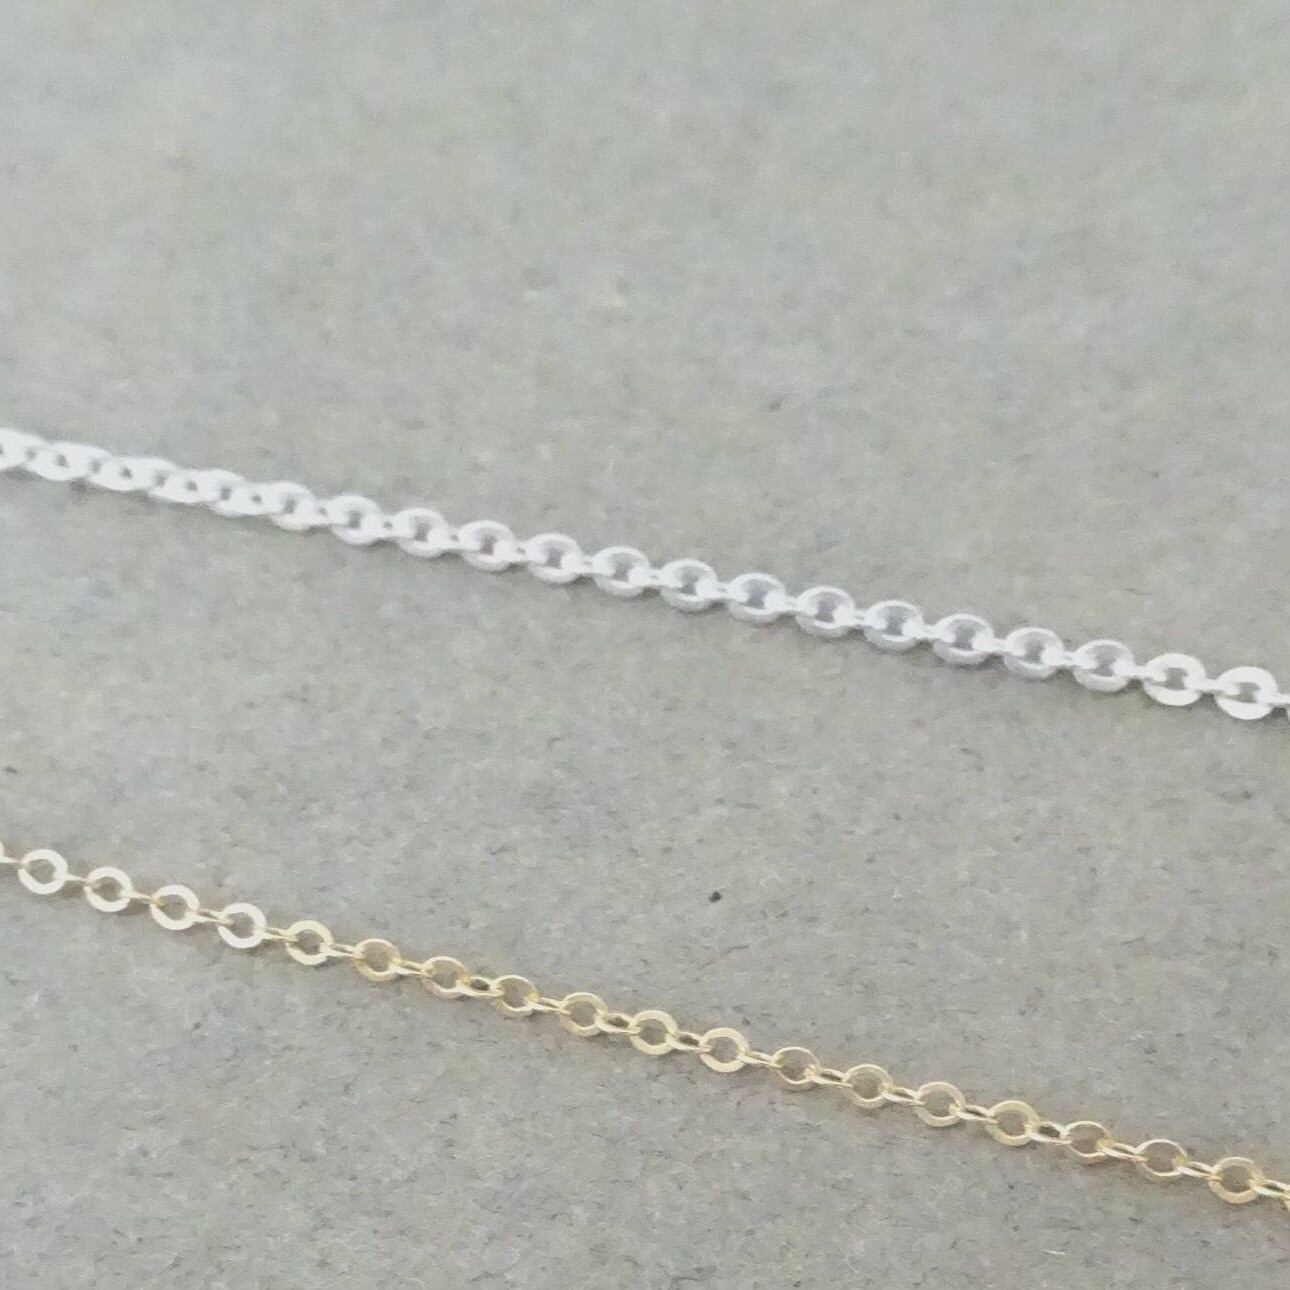 Minimalist Chain Necklace Gold, Silver, or Rose Gold Basic Gold Chain  Necklace Dainty Necklace Layering Thin Chain Necklace 